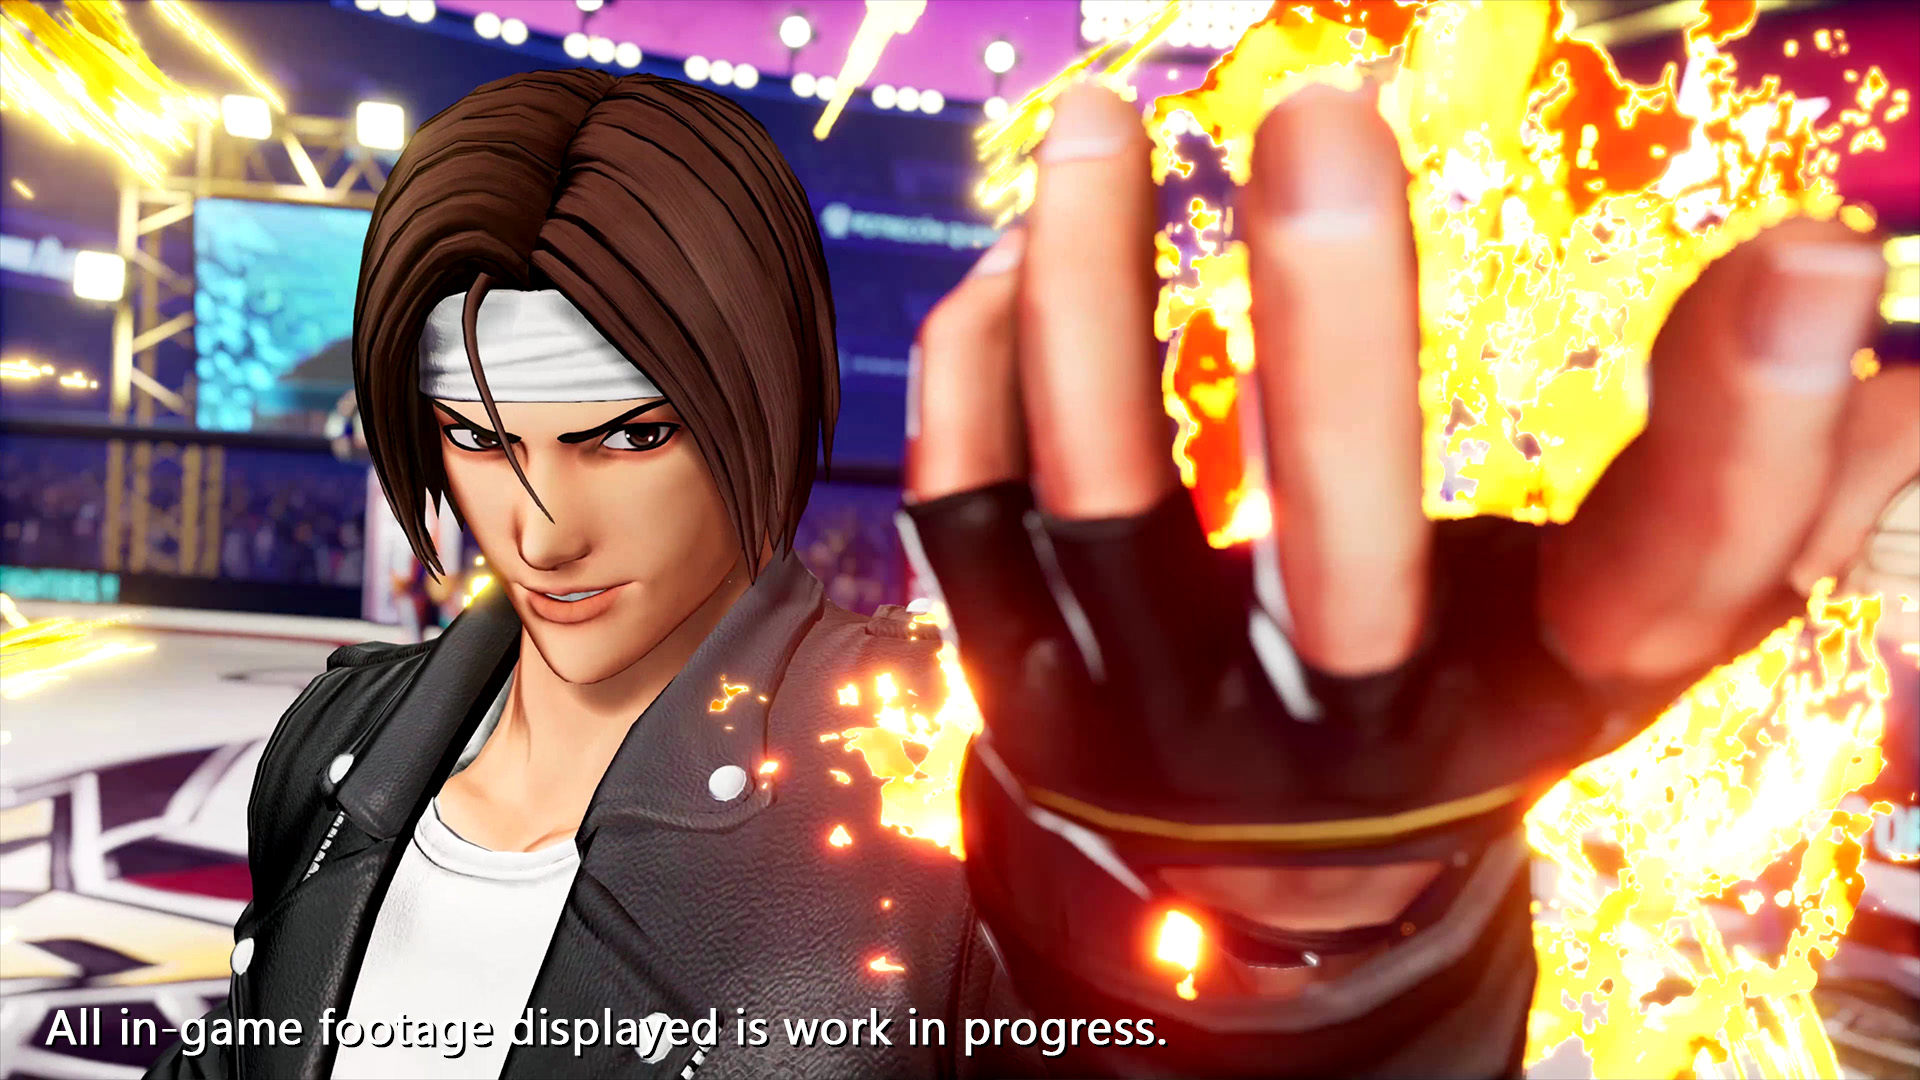 Iori Yagami revealed for King of Fighters 15 with new gameplay